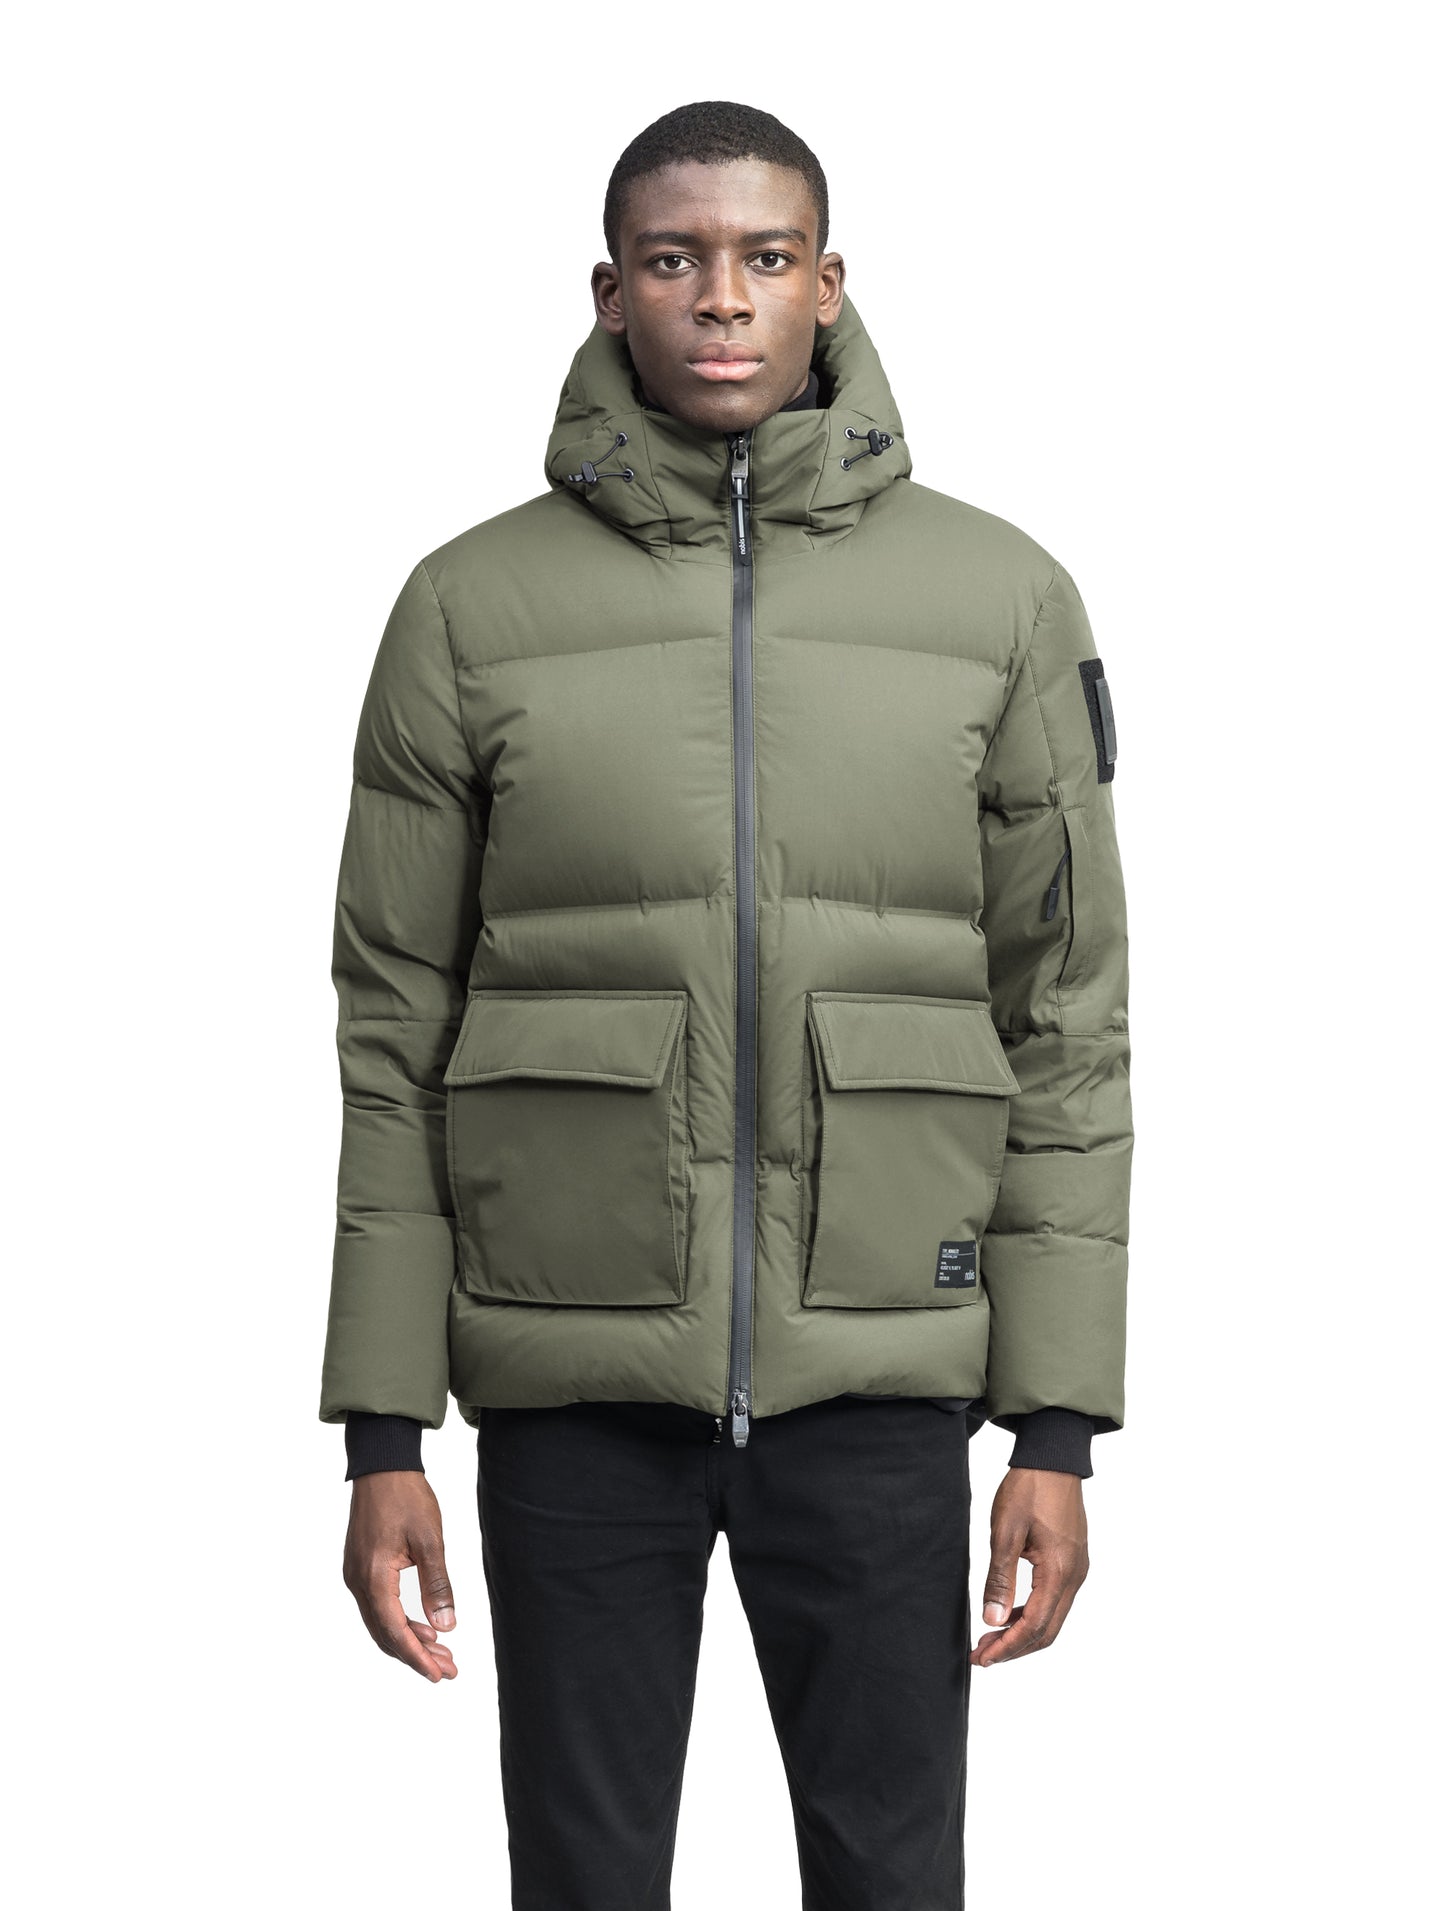 Supra Men's Performance Puffer in hip length, Technical Taffeta and 3-Ply Micro Denier fabrication, Premium Canadian White Duck Down insulation, non-removable down filled hood, centre front two-way zipper, flap pockets at waist, and zipper pocket at left bicep, in Clove